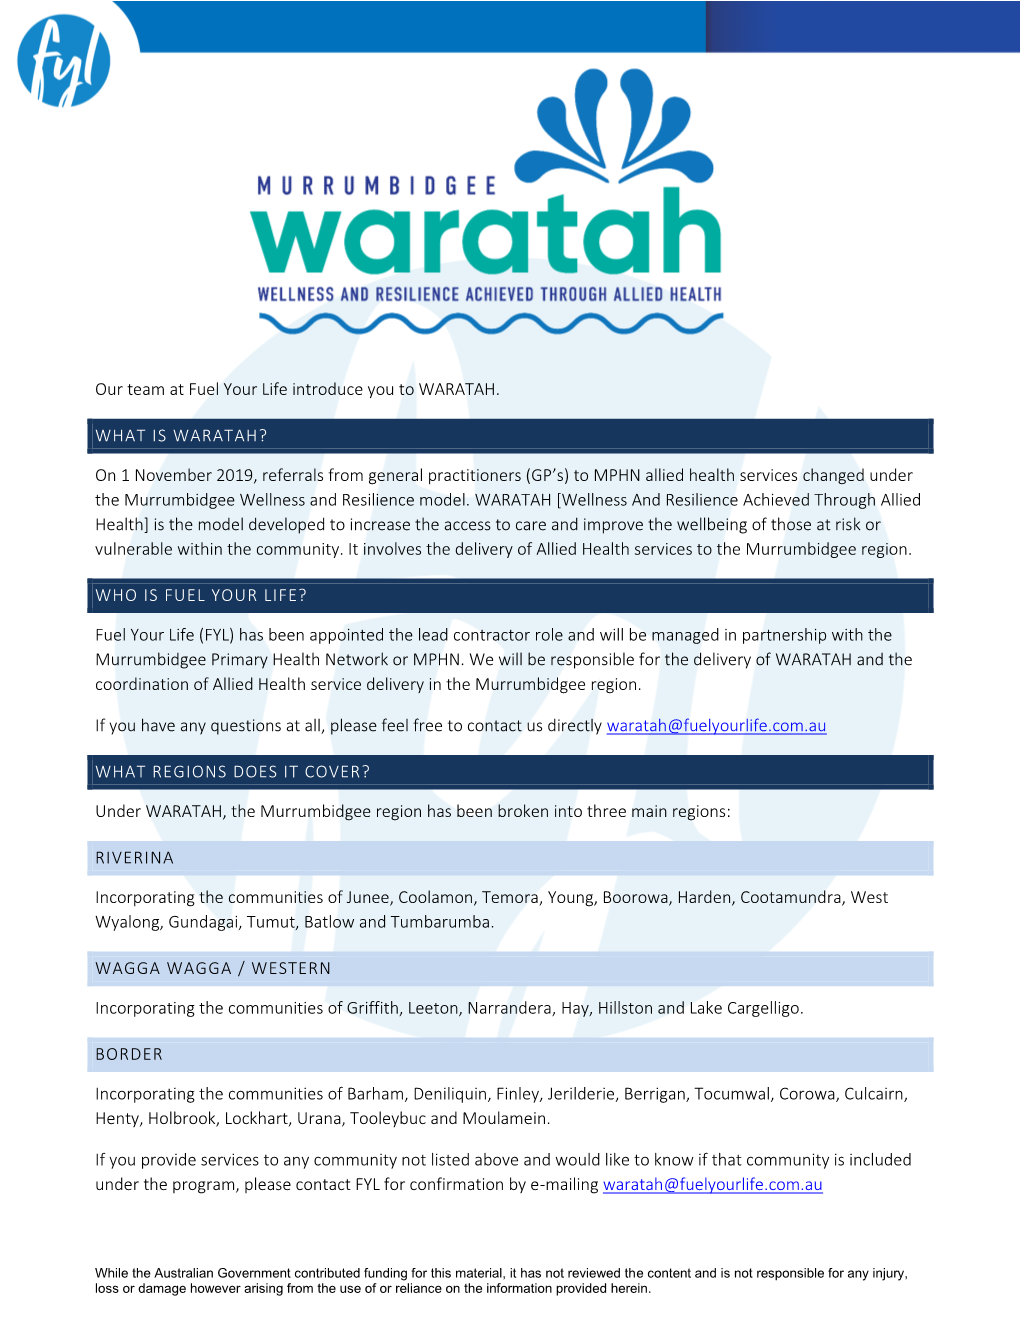 Our Team at Fuel Your Life Introduce You to WARATAH. WHAT IS